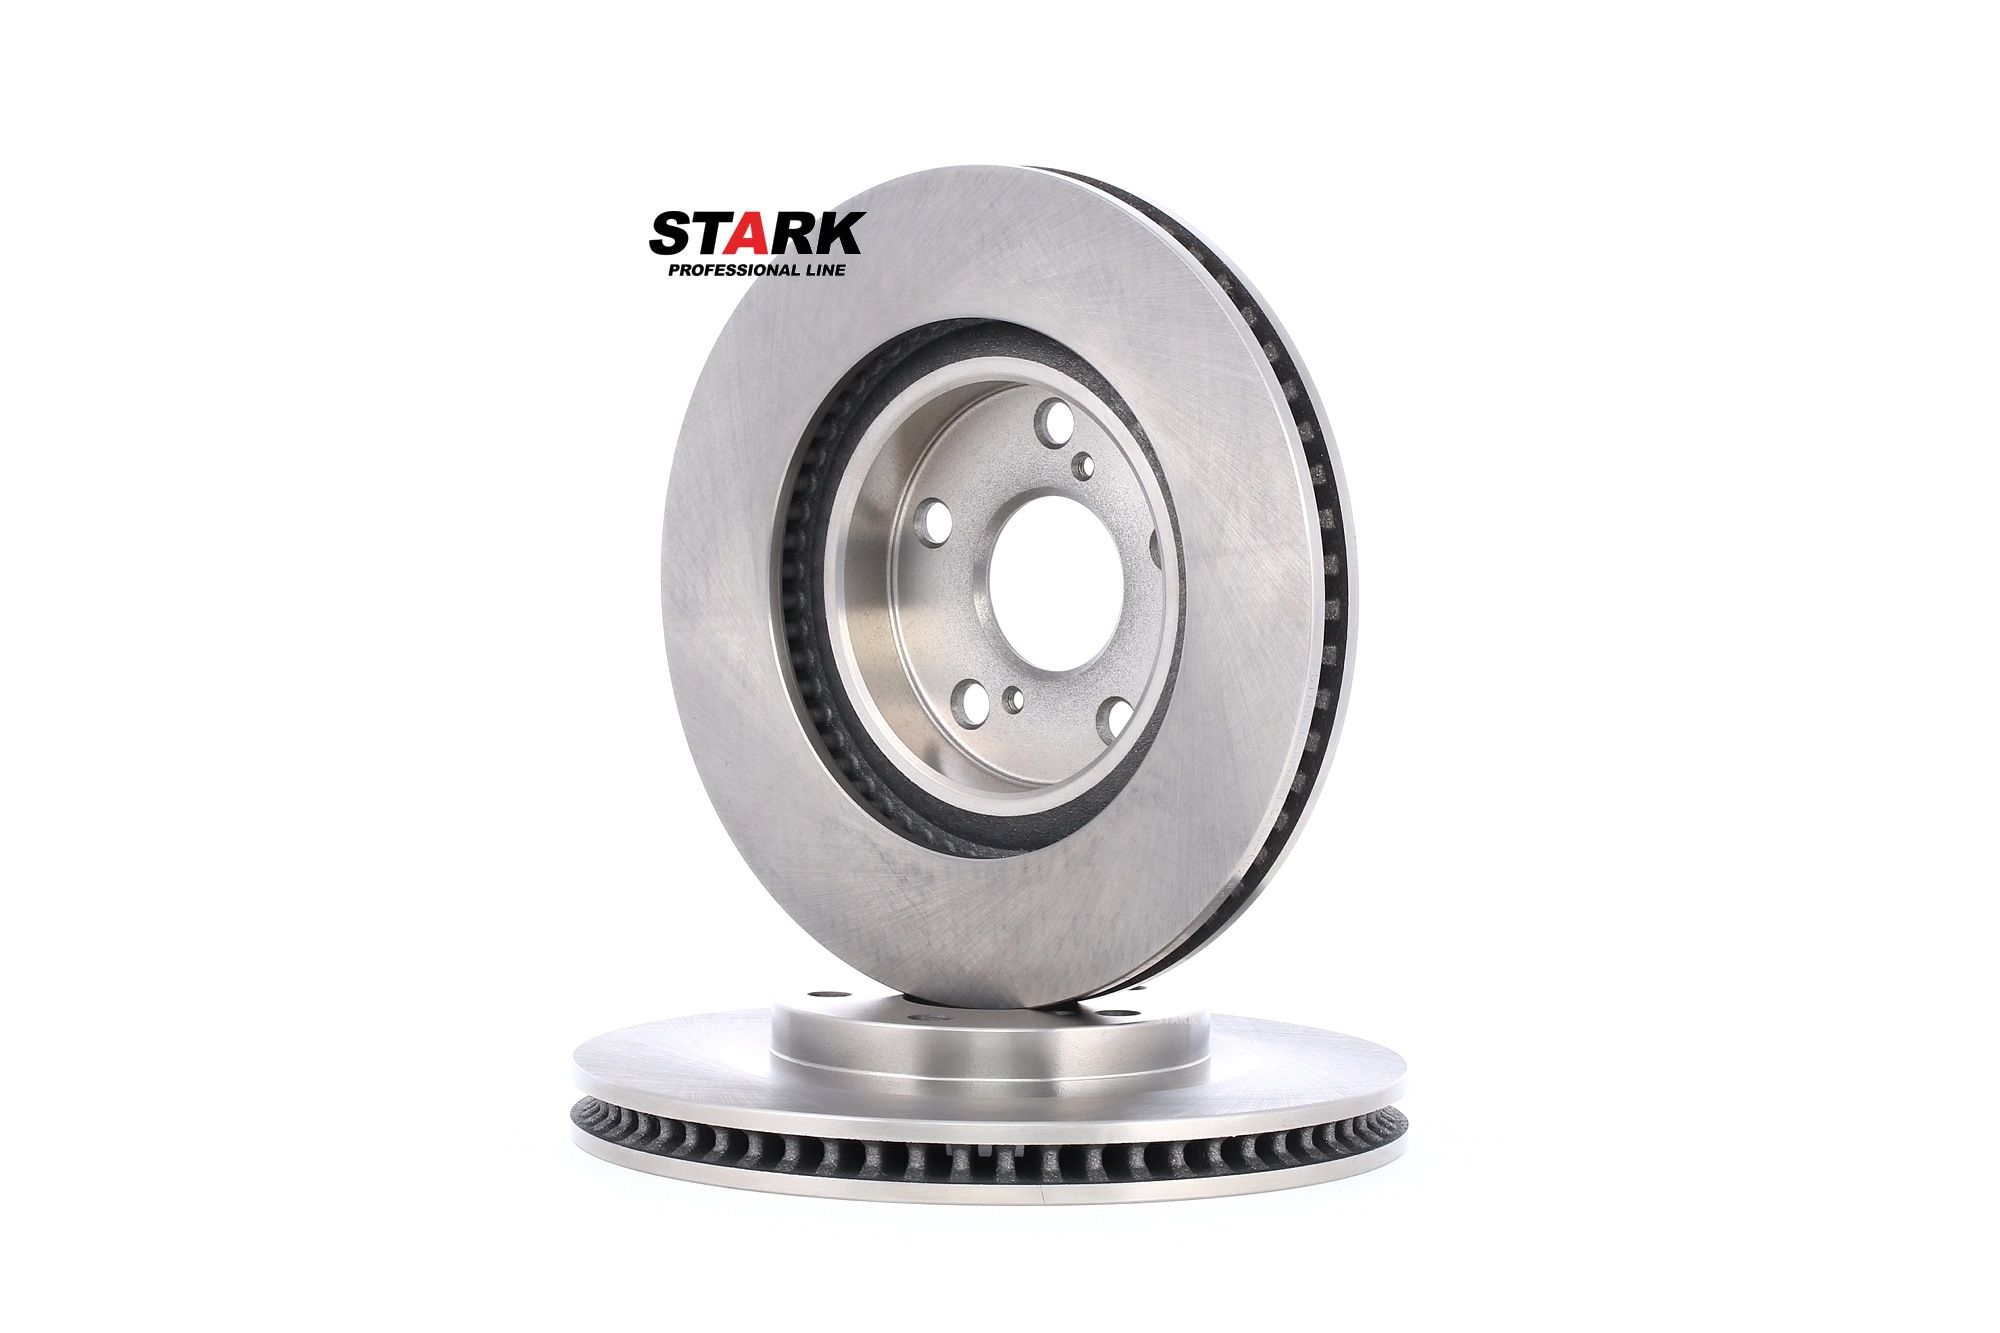 SKBD-0020310 STARK Brake rotors TOYOTA Front Axle, 296x28mm, 05/07x114,3, internally vented, Uncoated